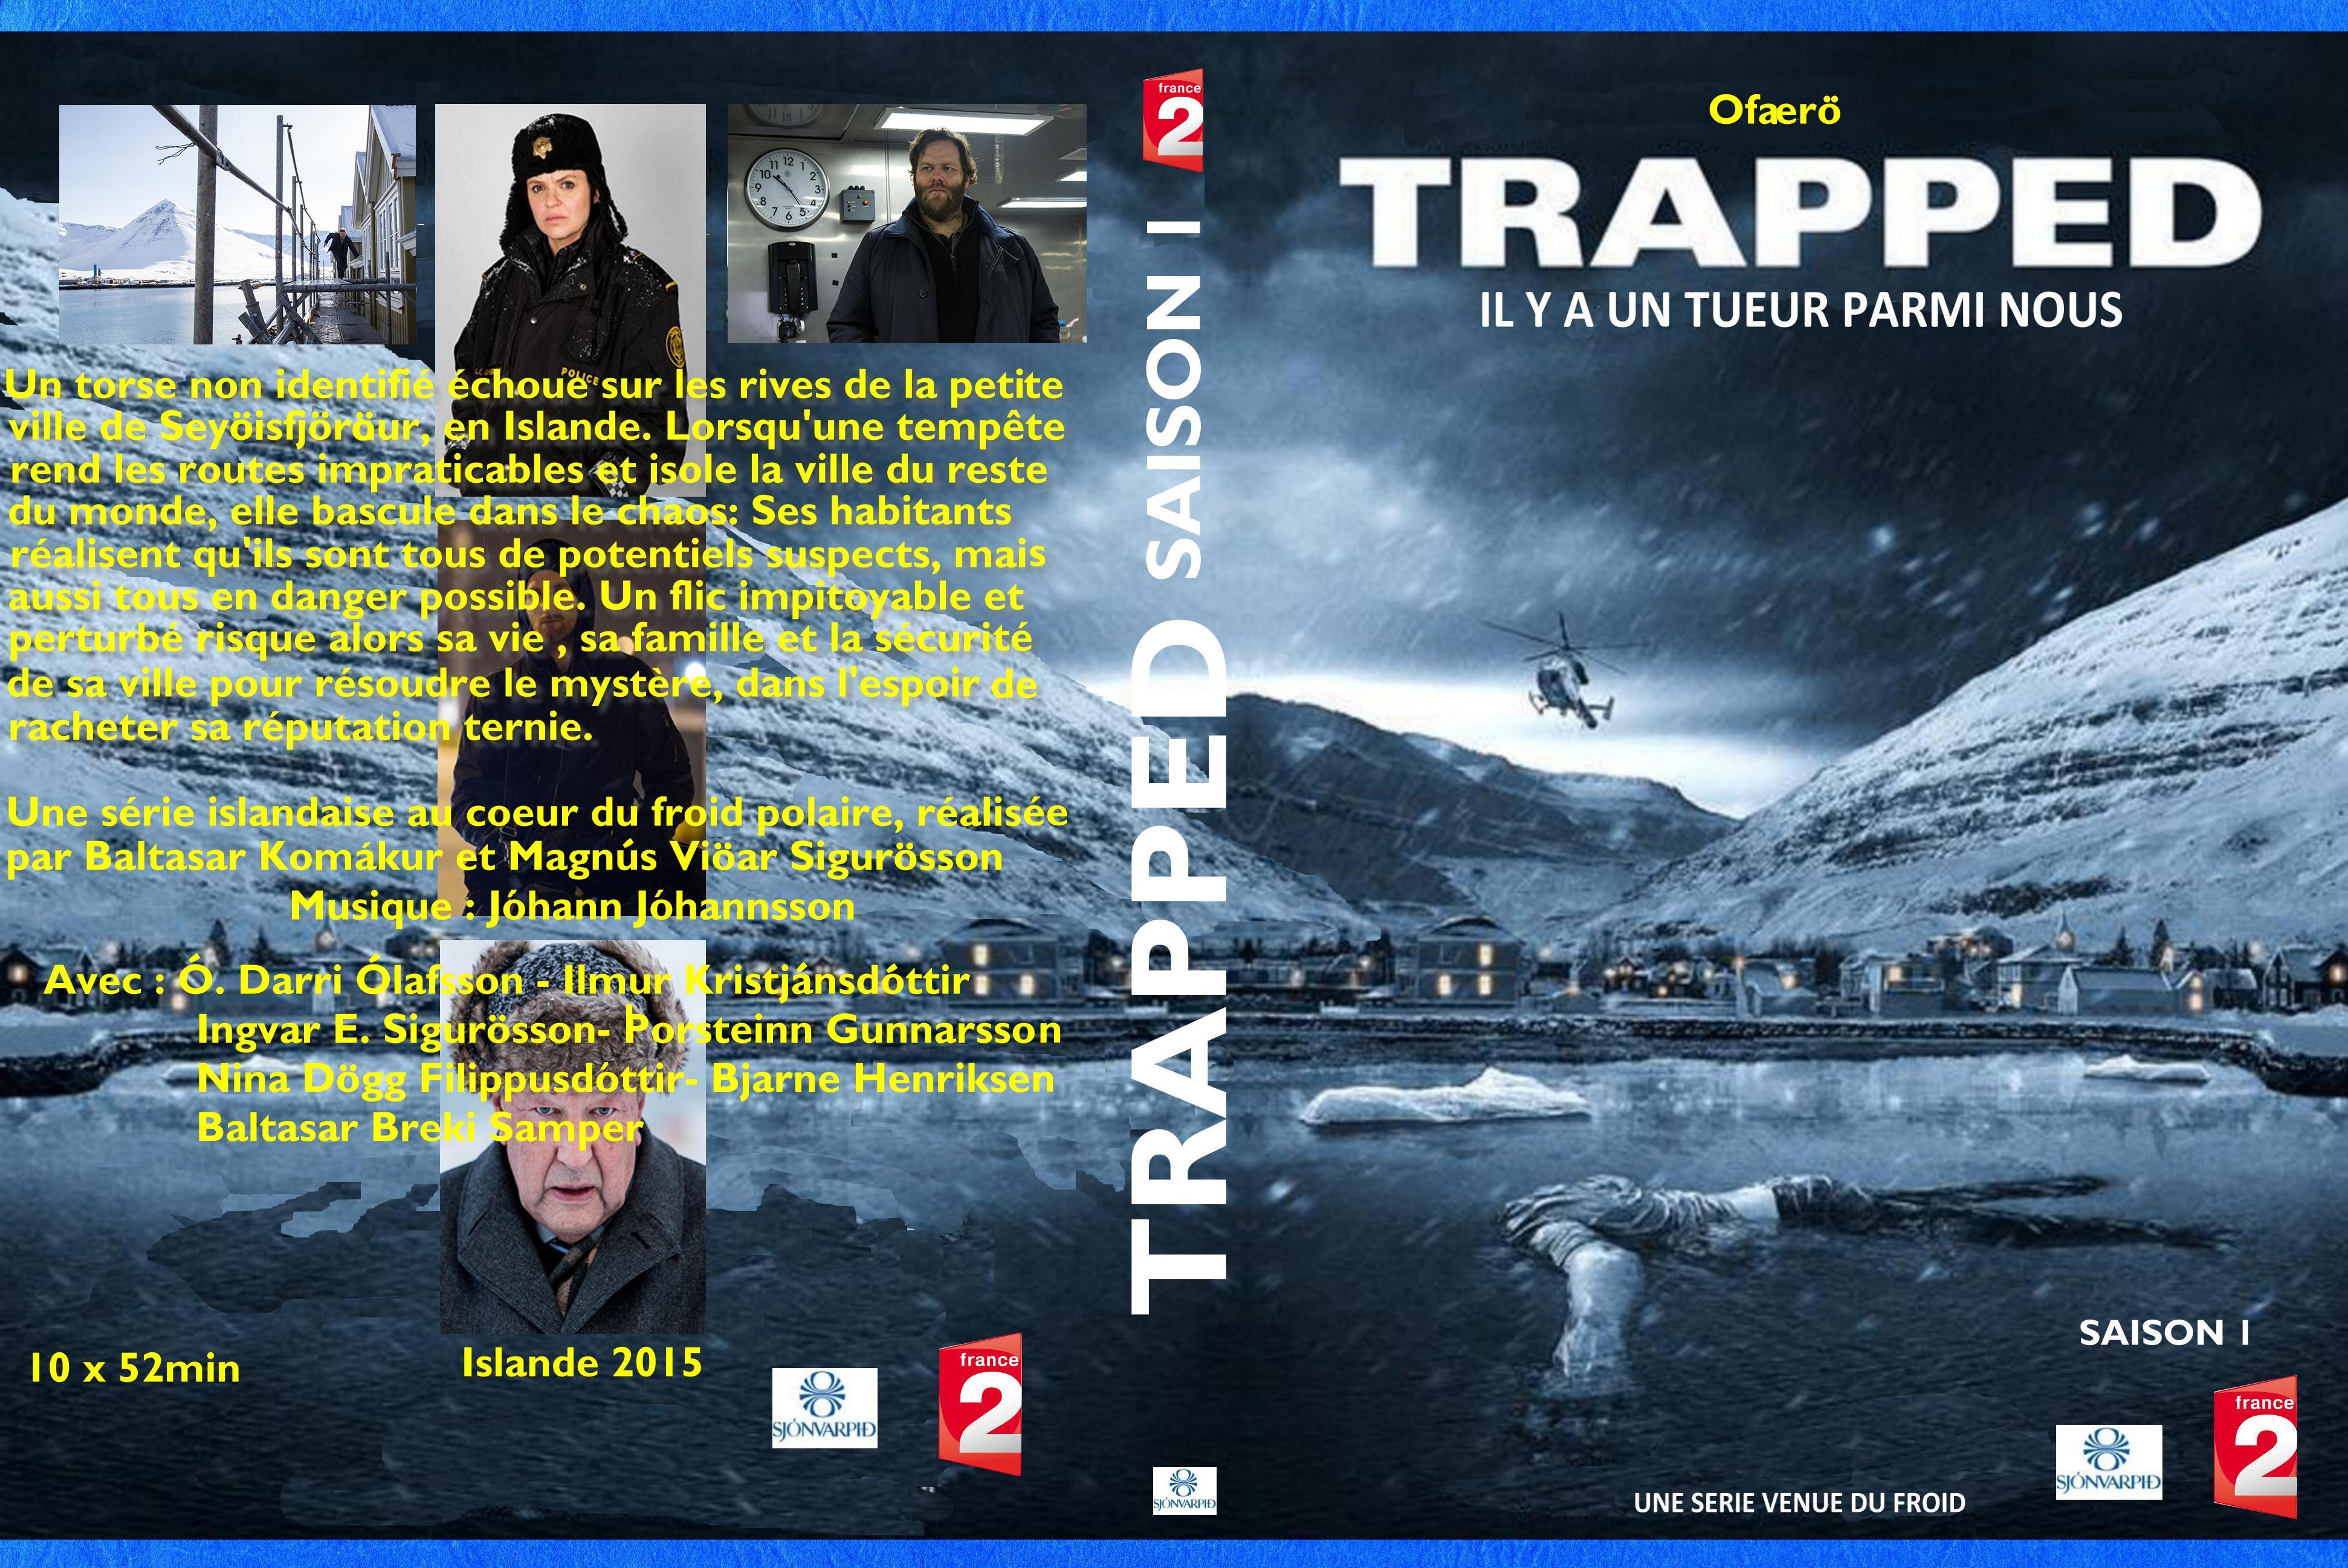 Jaquette DVD Trapped custom